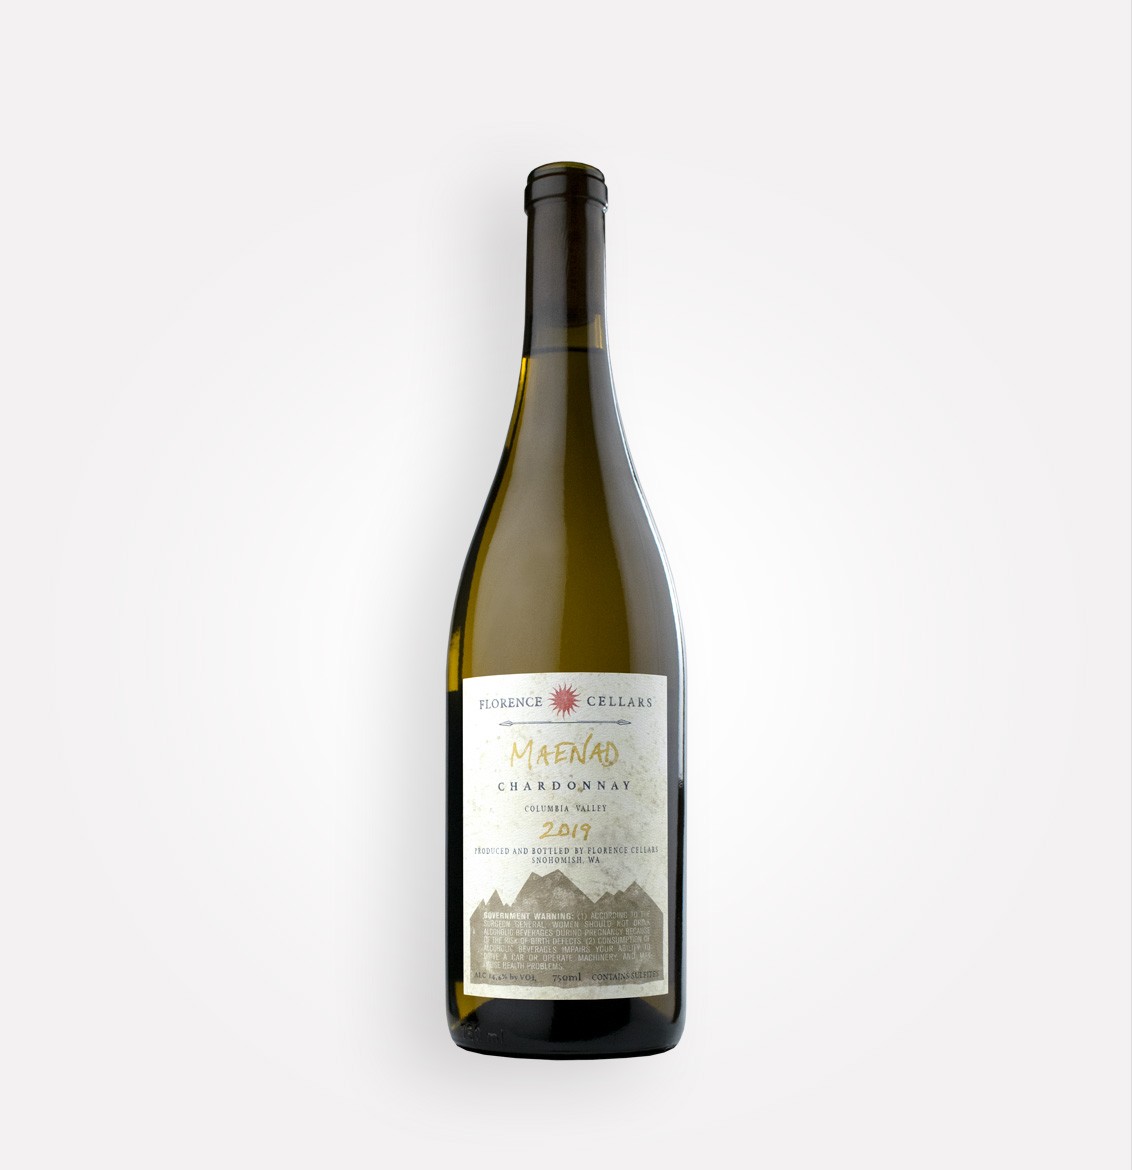 Back bottle view of Florence Cellars 2019 Maenad Chardonnay wine from Washington's Columbia Valley